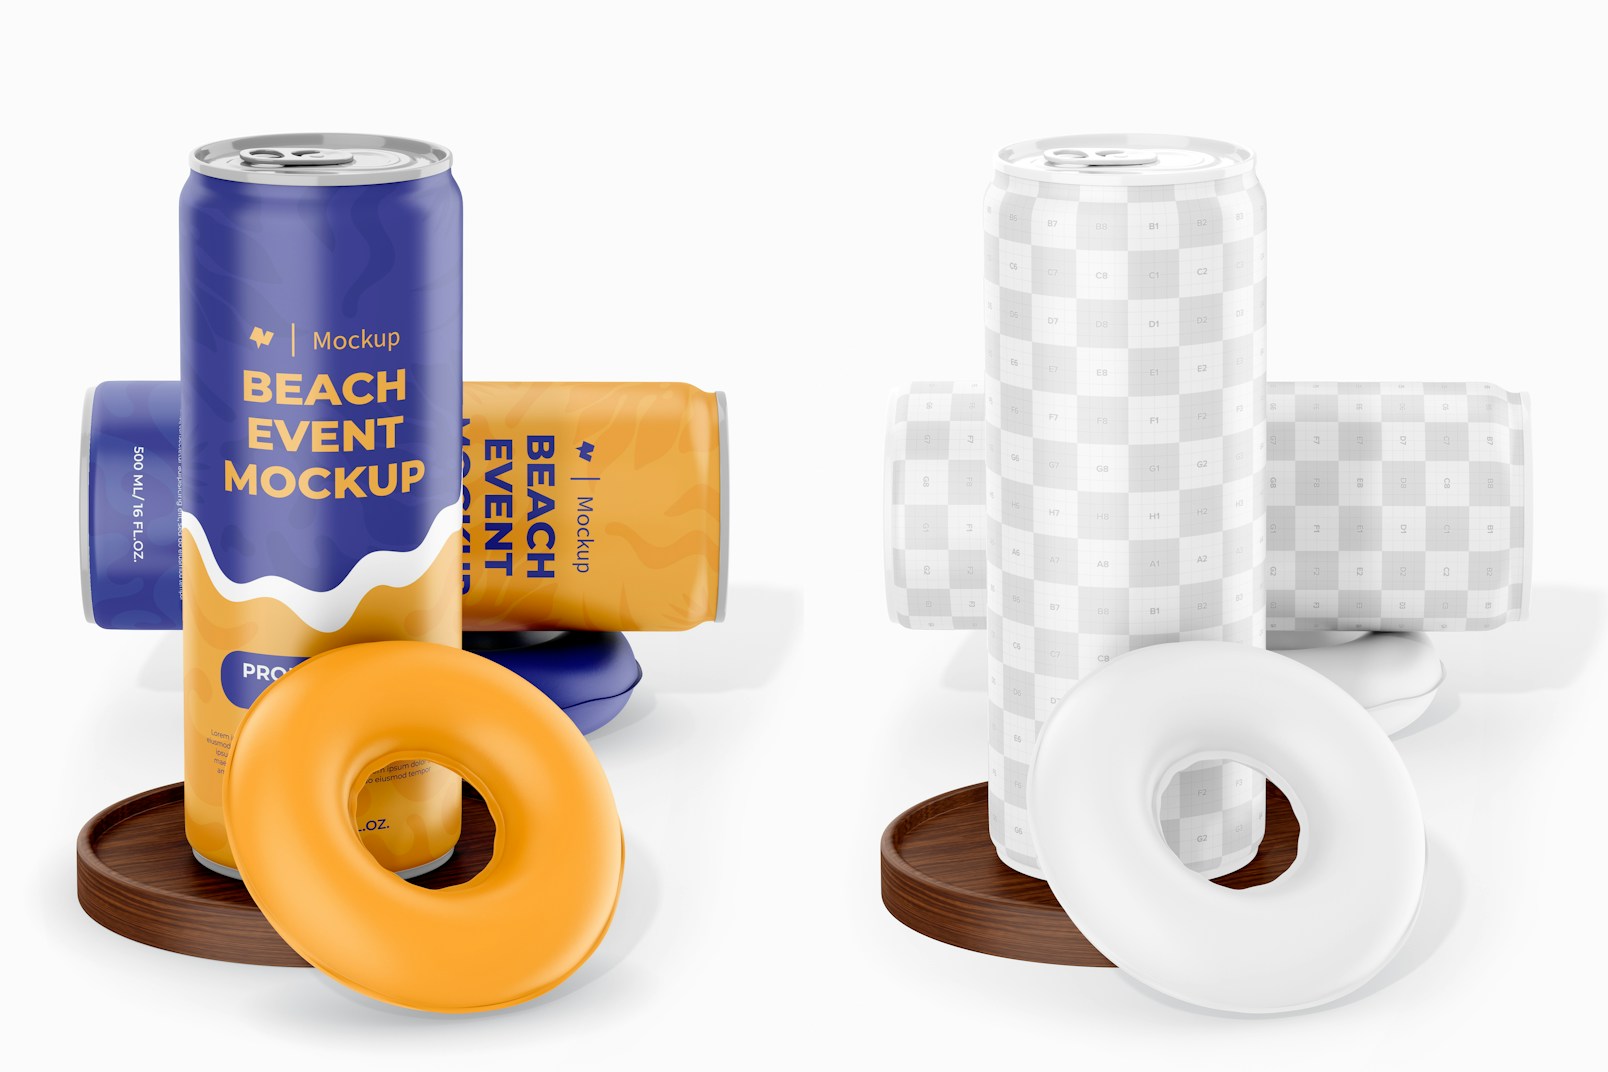 Promotional Beer Cans Mockup, Standing and Dropped